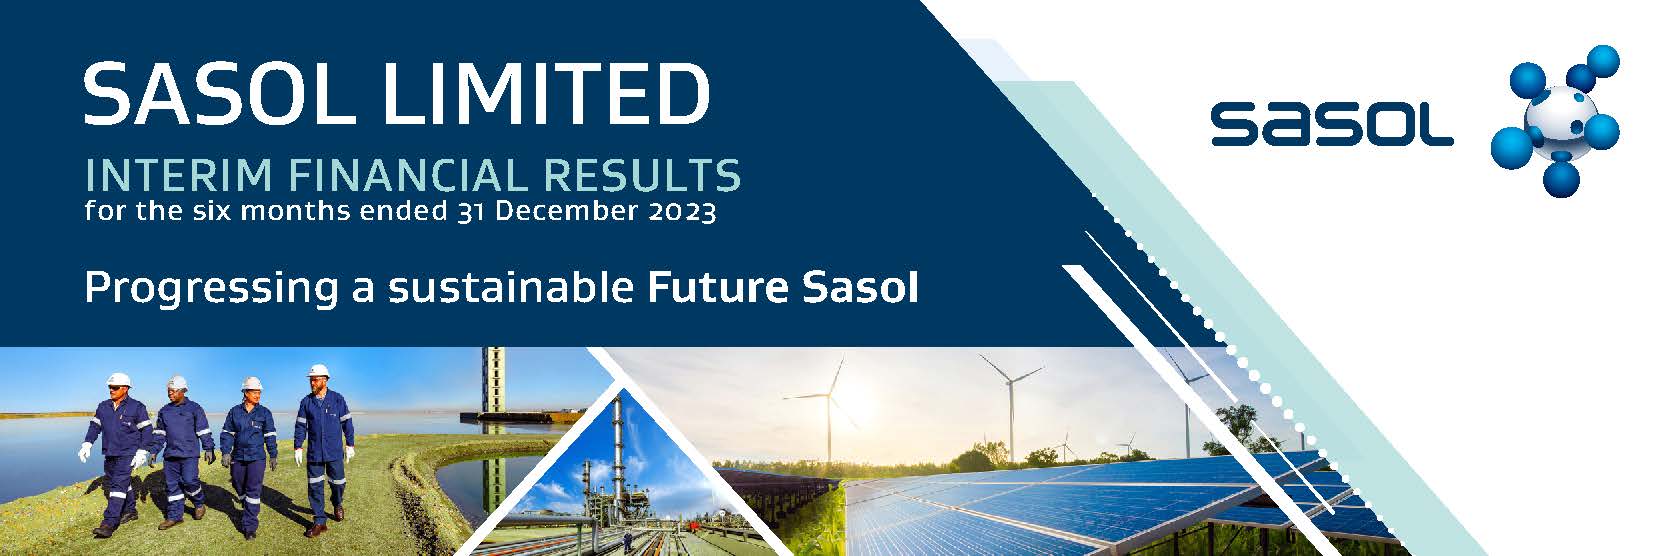 Sasol’s Interim Financial Results for the six months ended 31 December 2023